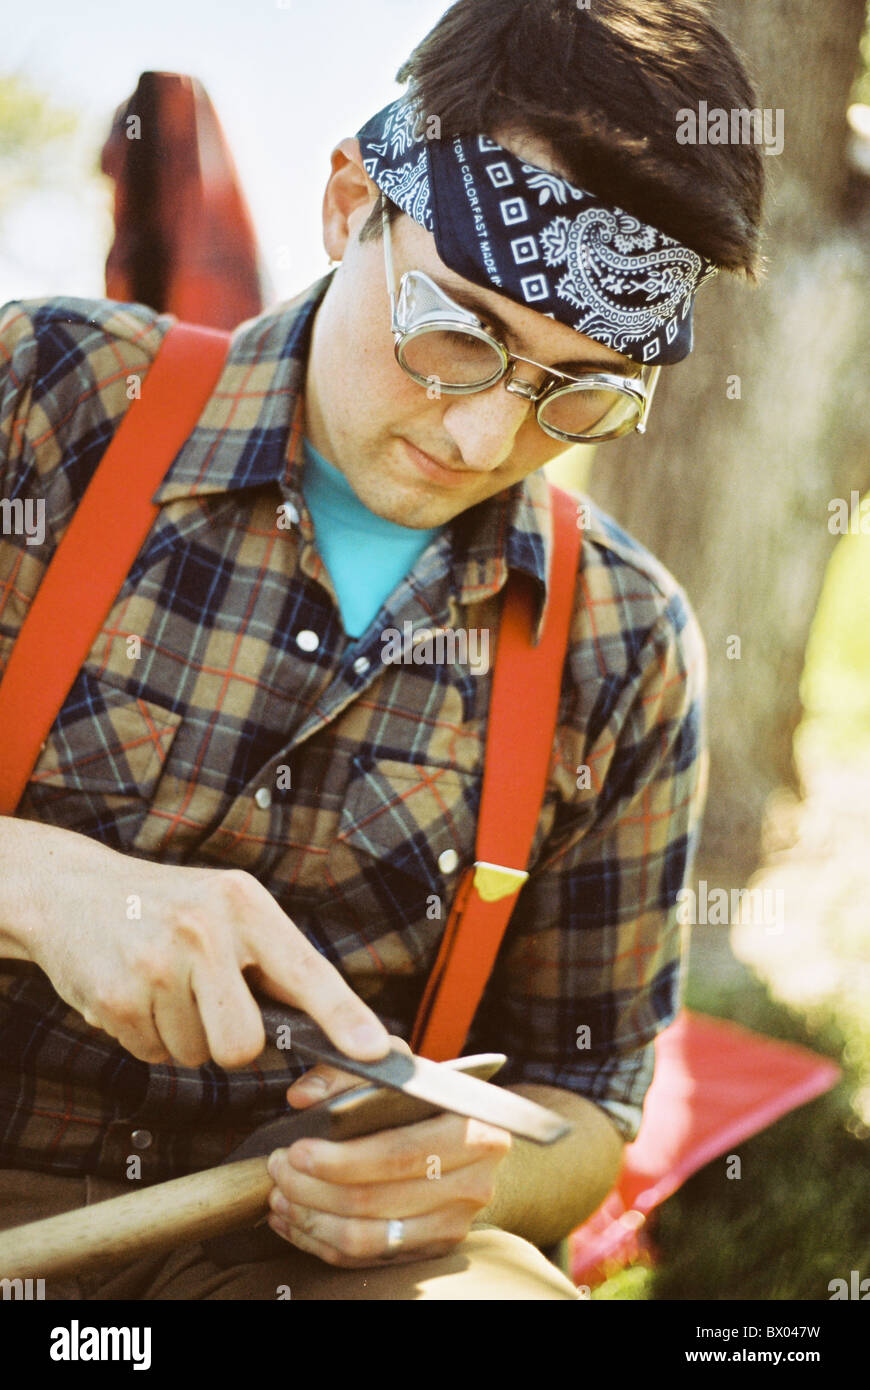 A man wearing suspenders, flannel, and a bandana sharpens a maul. Stock Photo